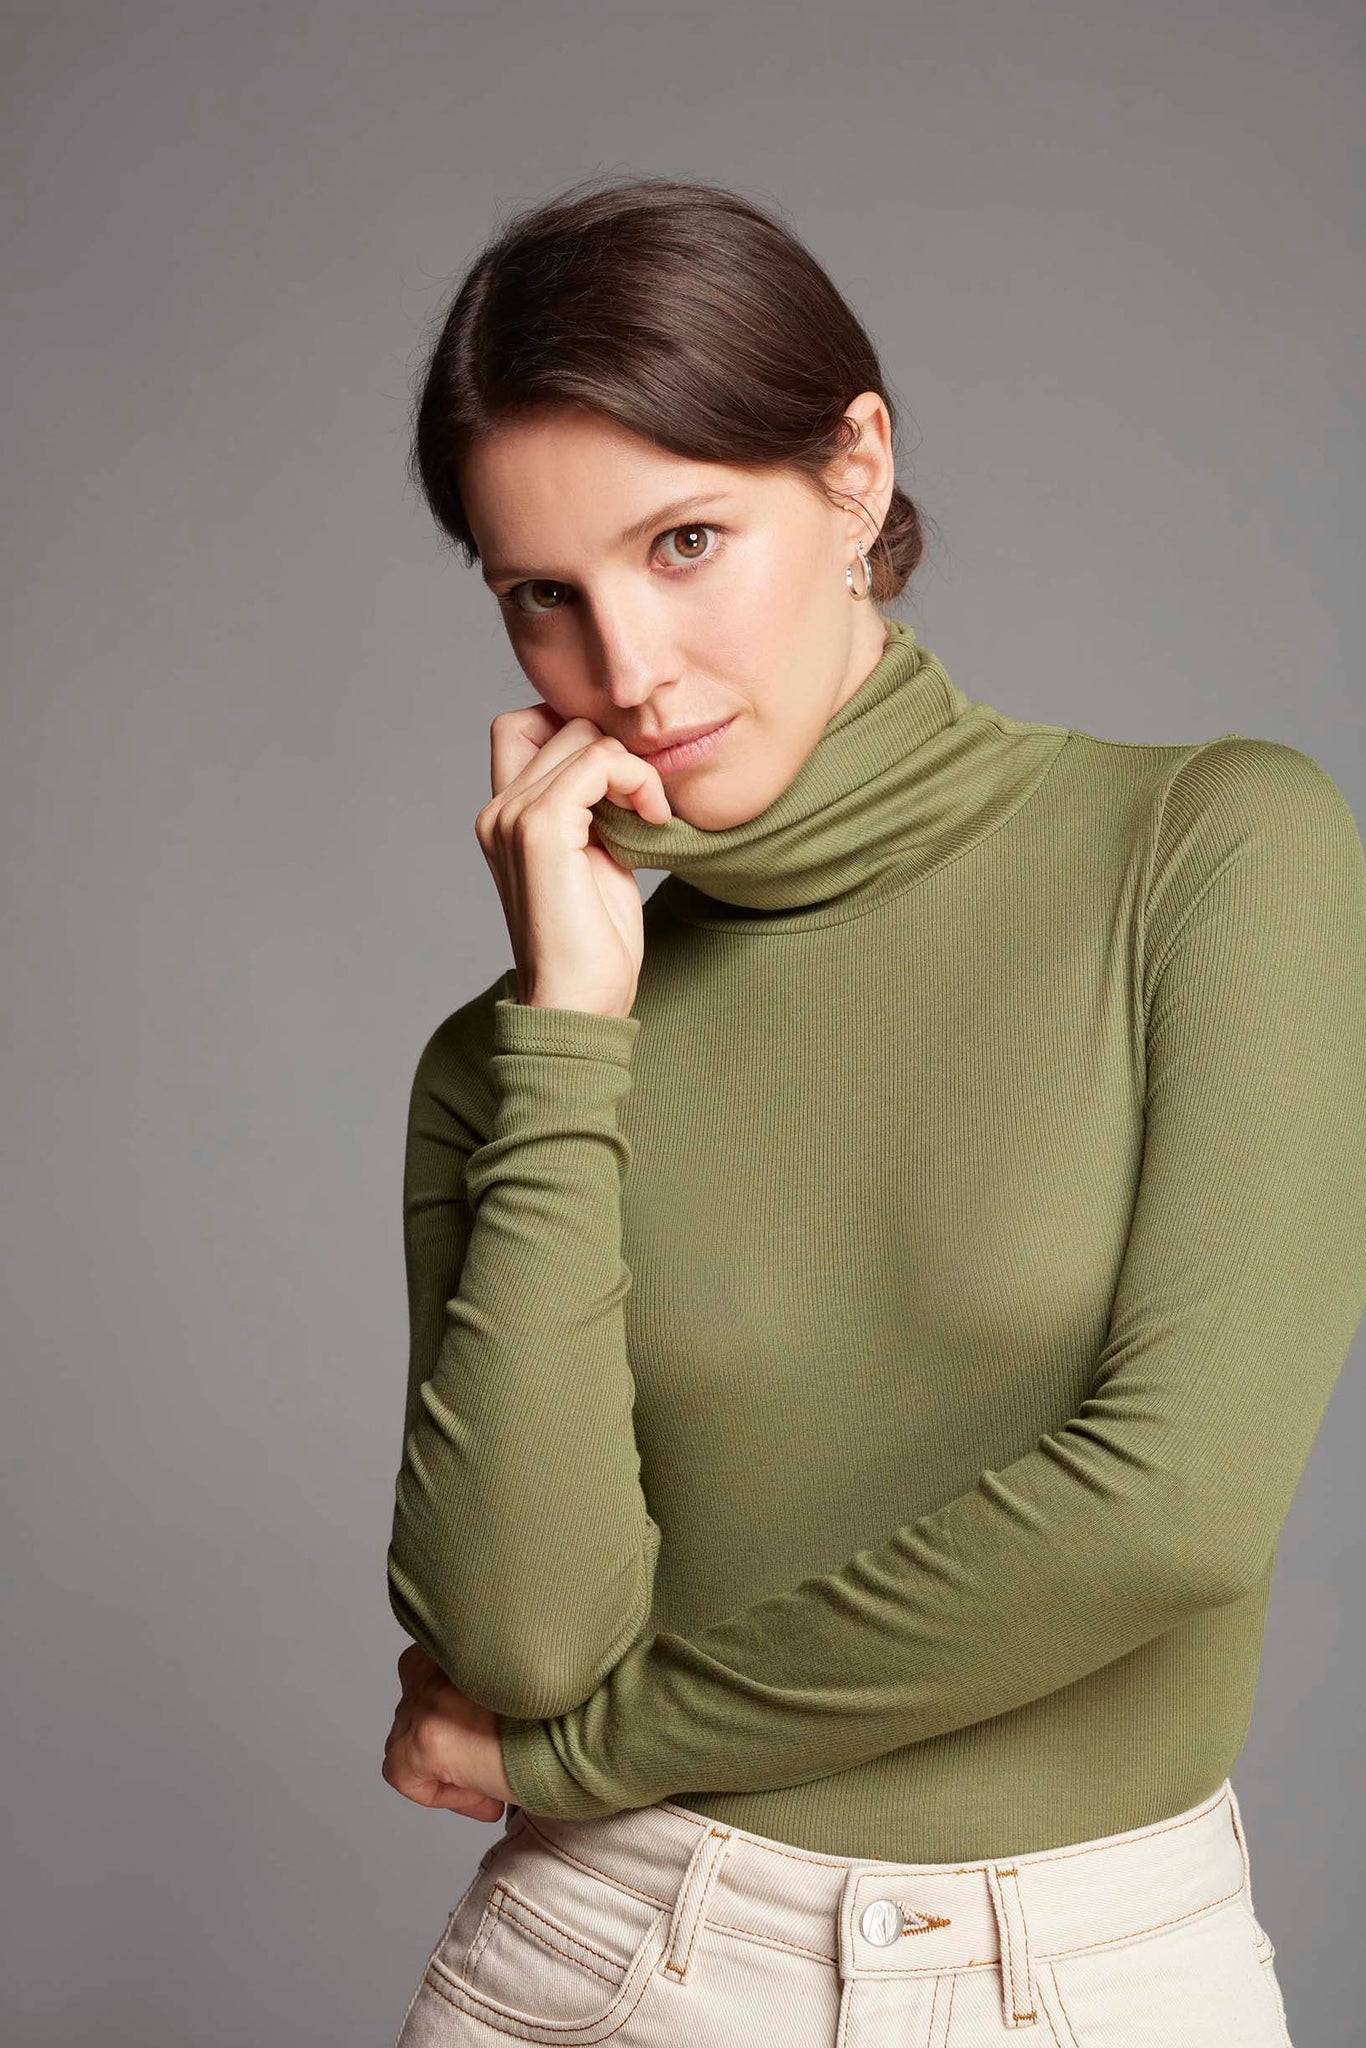 Luxury Women's Silk Rib Roll Neck Top in Olive - Long Sleeve Roll Neck Top - Essential Layering Roll Neck Top - Fitted Roll Neck Top by Lavender Hill Clothing